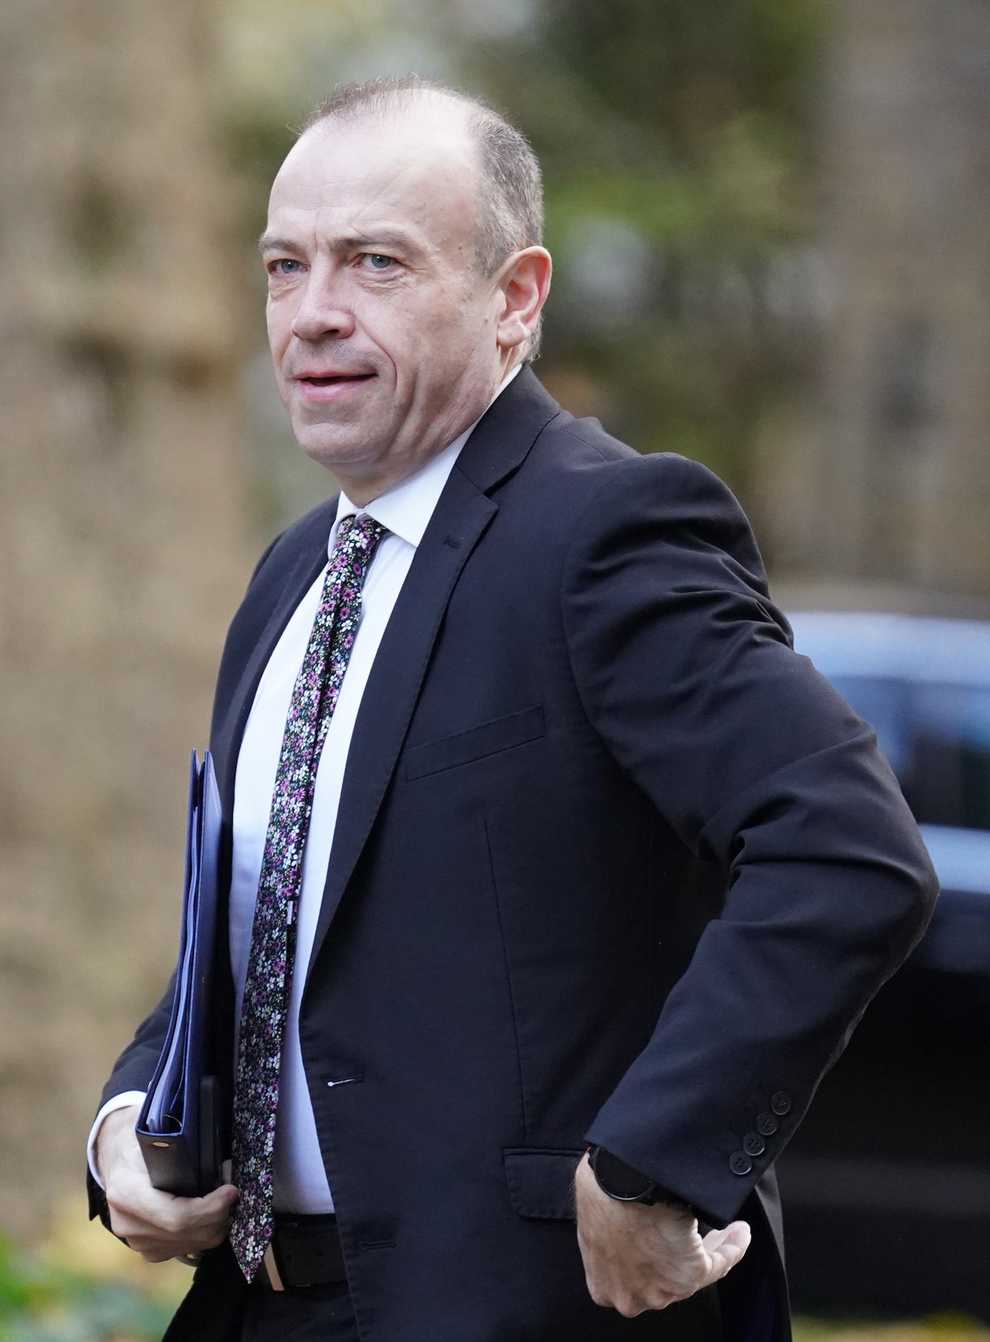 Northern Ireland Secretary Chris Heaton-Harris has said he should not be the one taking decisions on a budget for the region, but that local ministers should be doing so (Stefan Rousseau/PA)